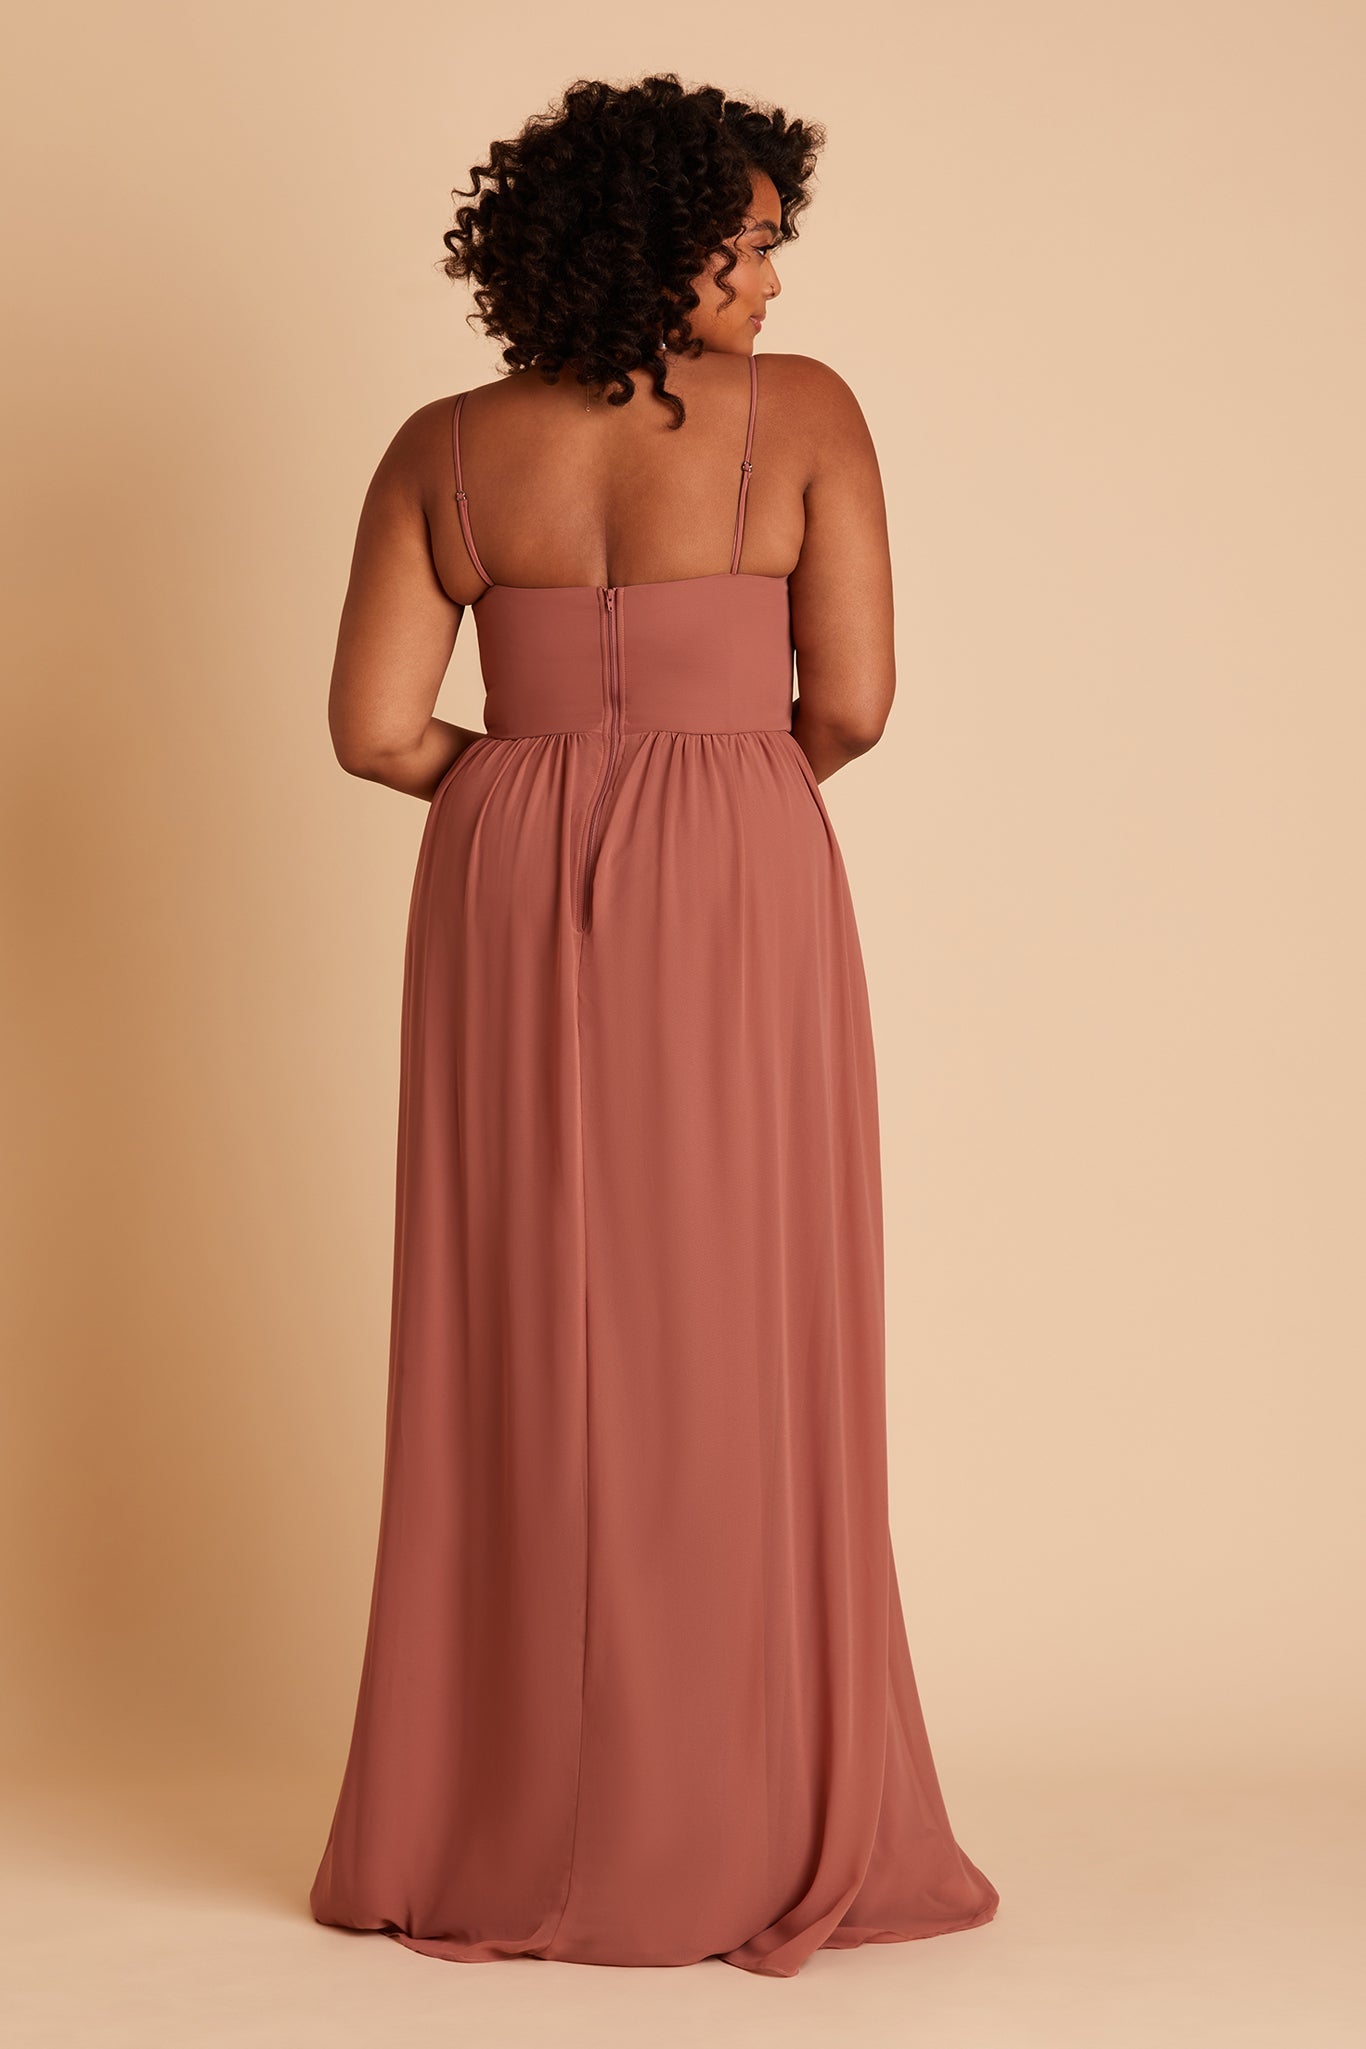 August plus size bridesmaid dress with slit in desert rose chiffon by Birdy Grey, back view